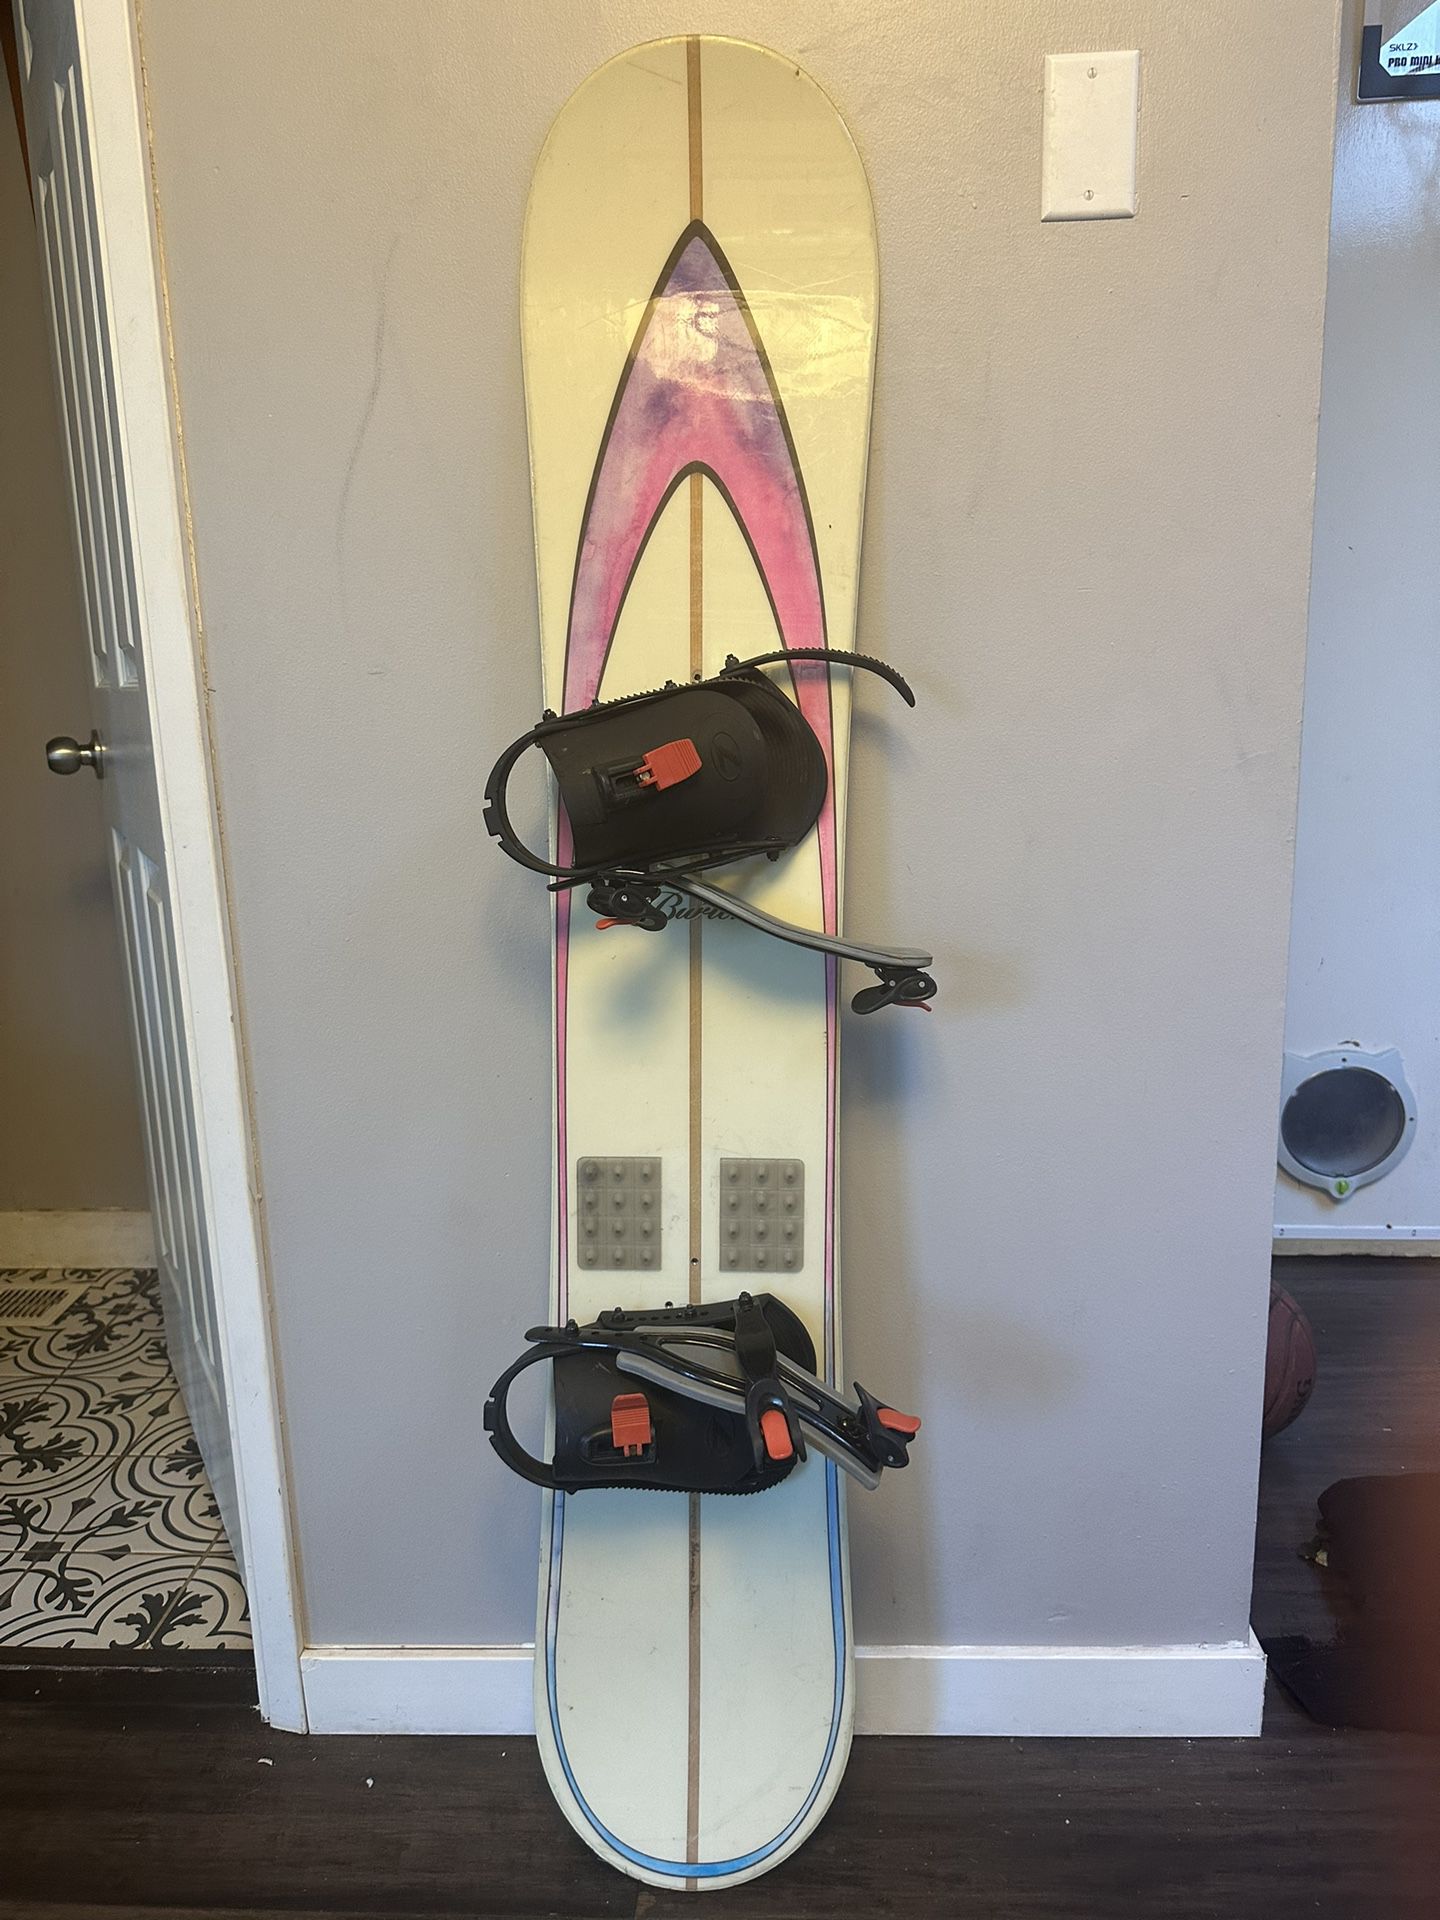 Burton Element 149 Snowboard with Boots, Bag, Helmet, Goggles, And Bindings. 